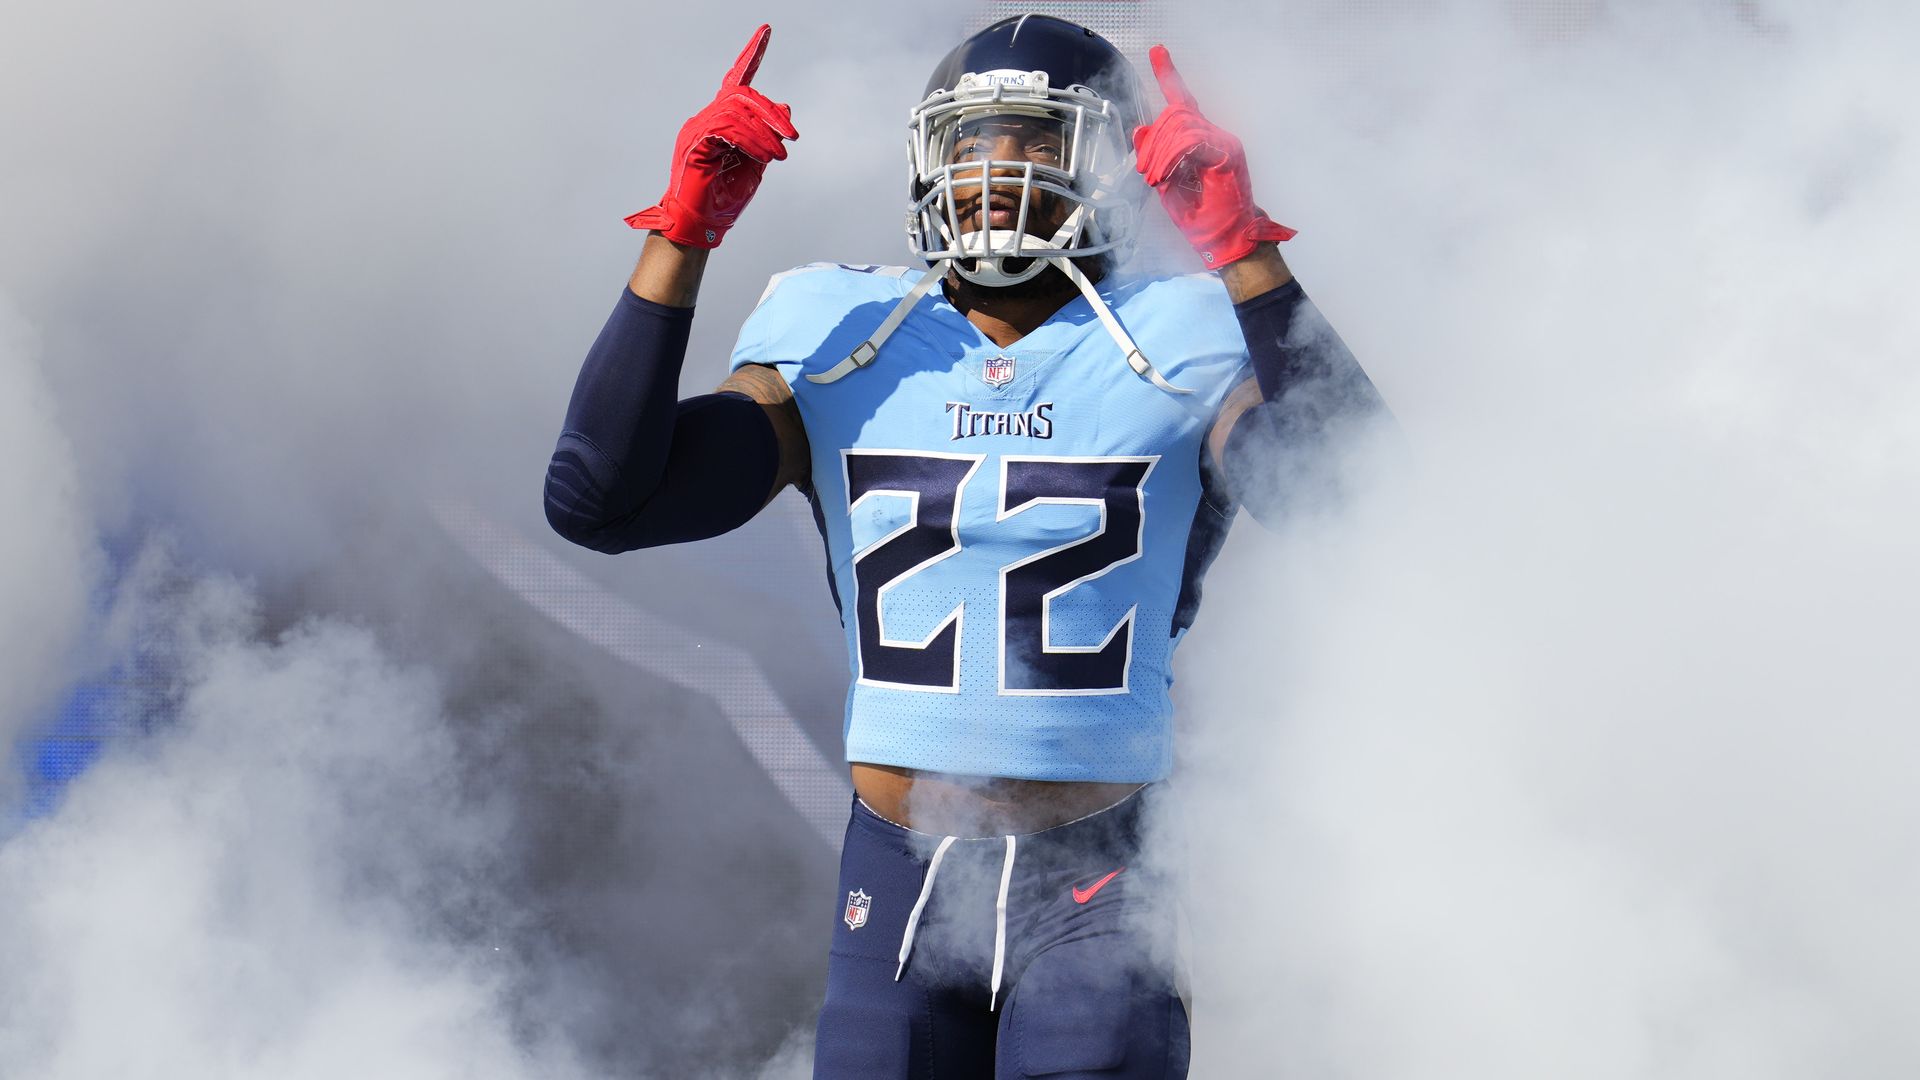 Derrick Henry #22 of the Tennessee Titans runs onto the field prior to an NFL game against the Kansas City Chiefs at Nissan Stadium on October 24, 2021 in Nashville, Tennessee. 